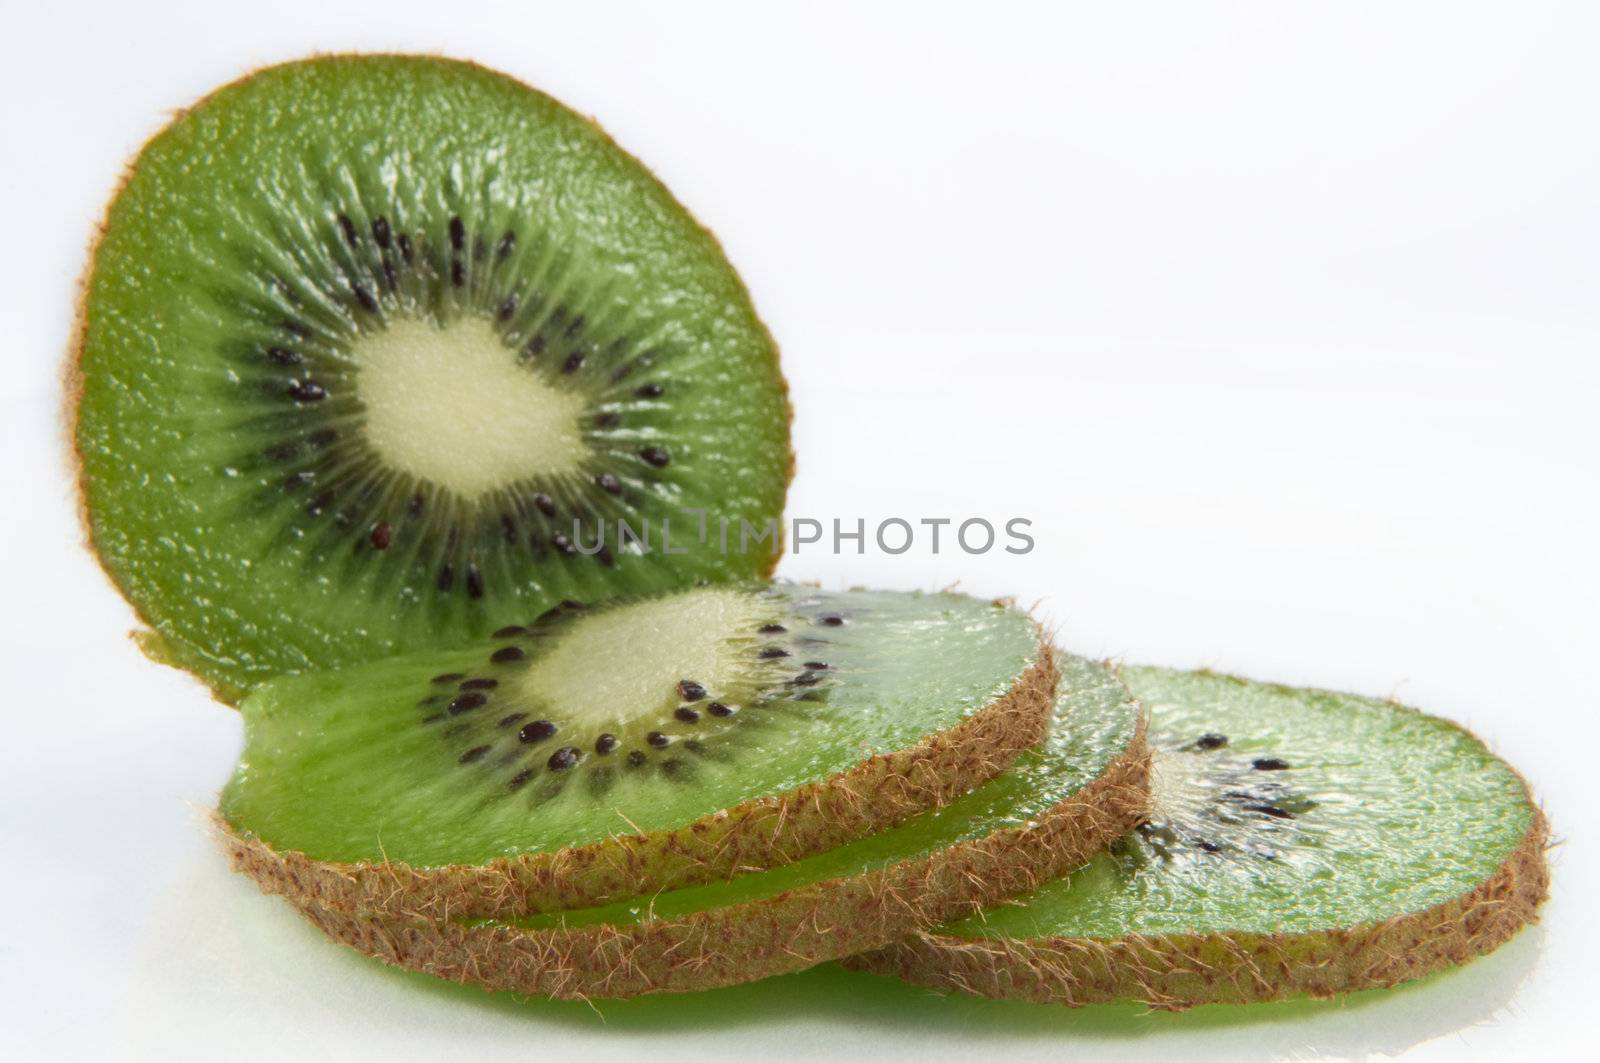 Close up and low level angle of a partially sliced fresh kiwifruit arranged over white.